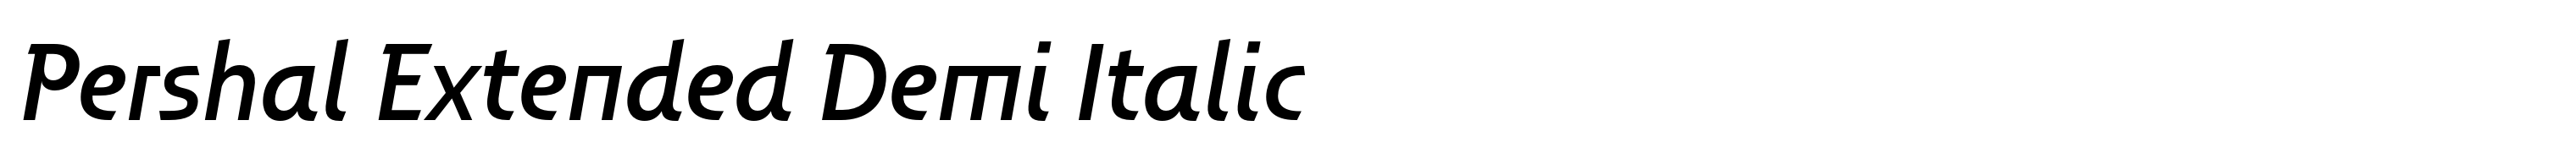 Pershal Extended Demi Italic